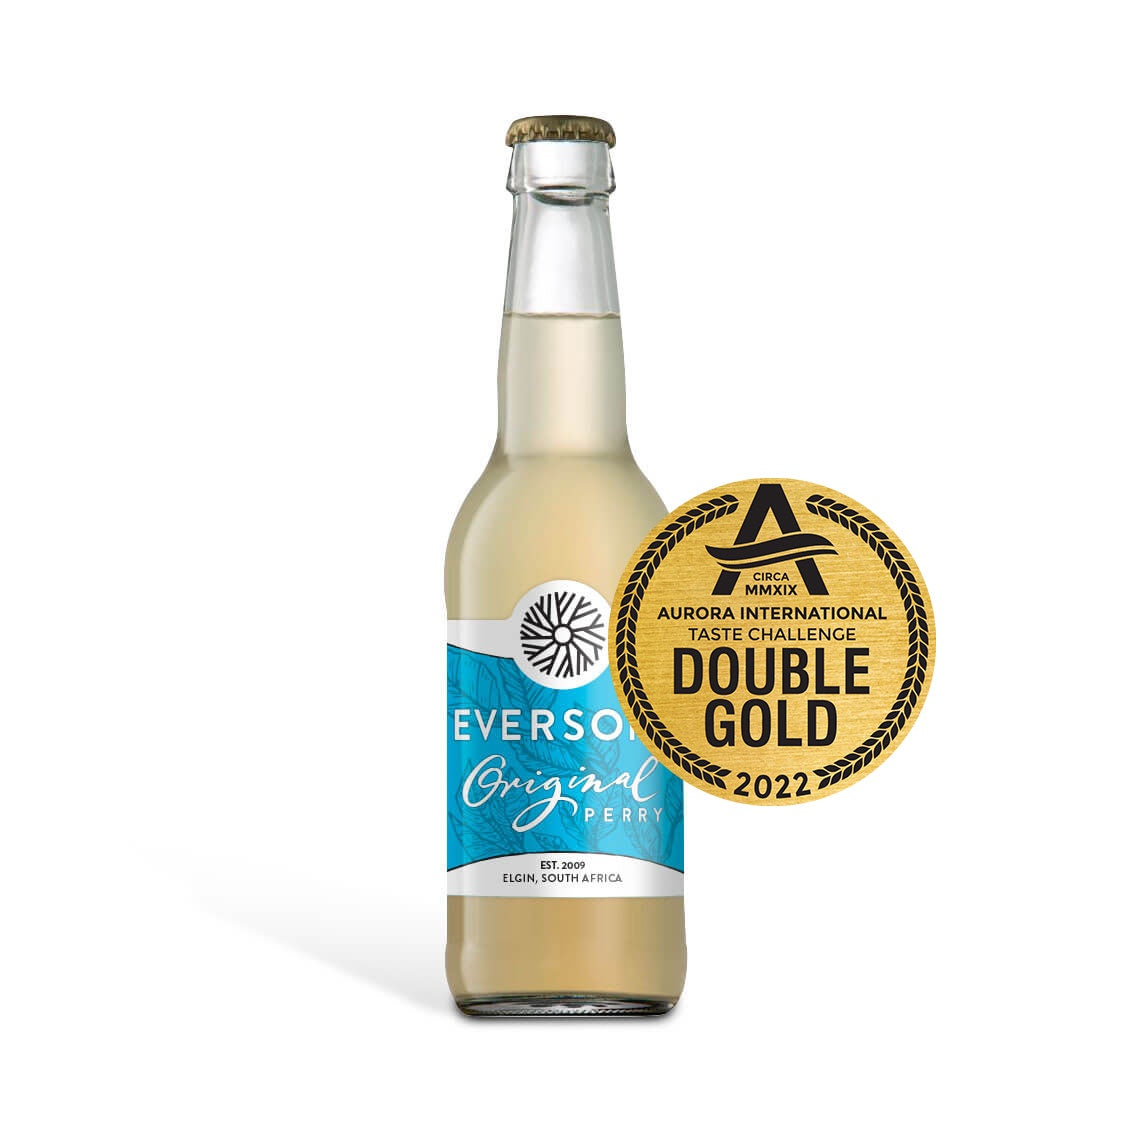 Everson's Original Perry - Pear Cider 340ml Bottle 4 Pack